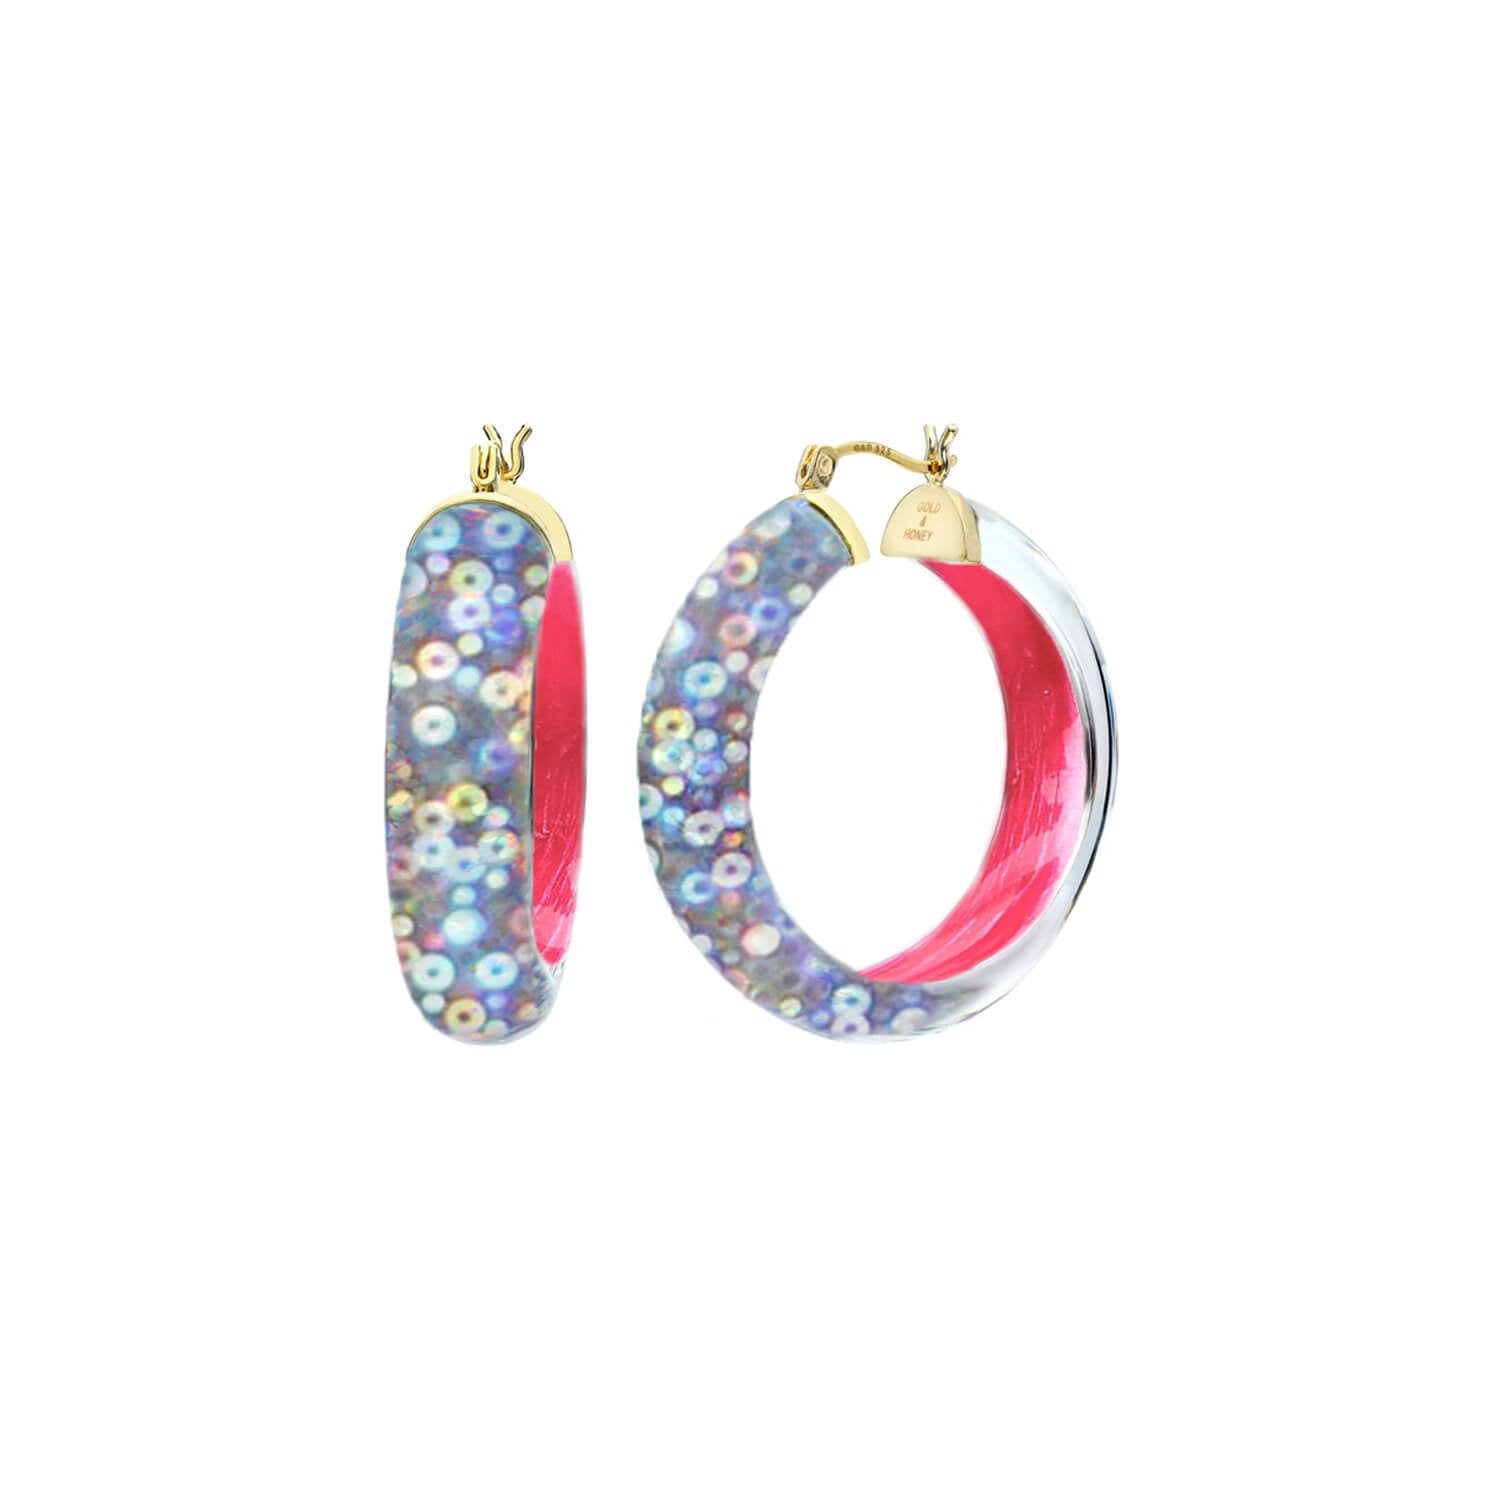 Holographic Iridescent Hoops in Pink